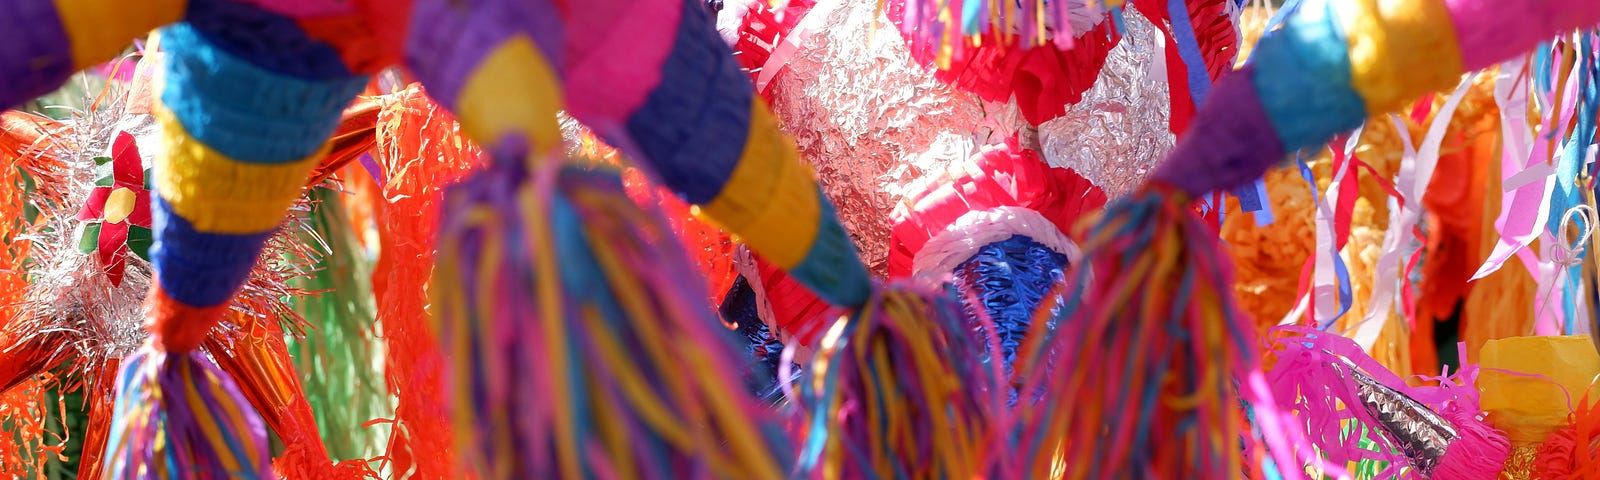 Colorful scene filled with piñatas